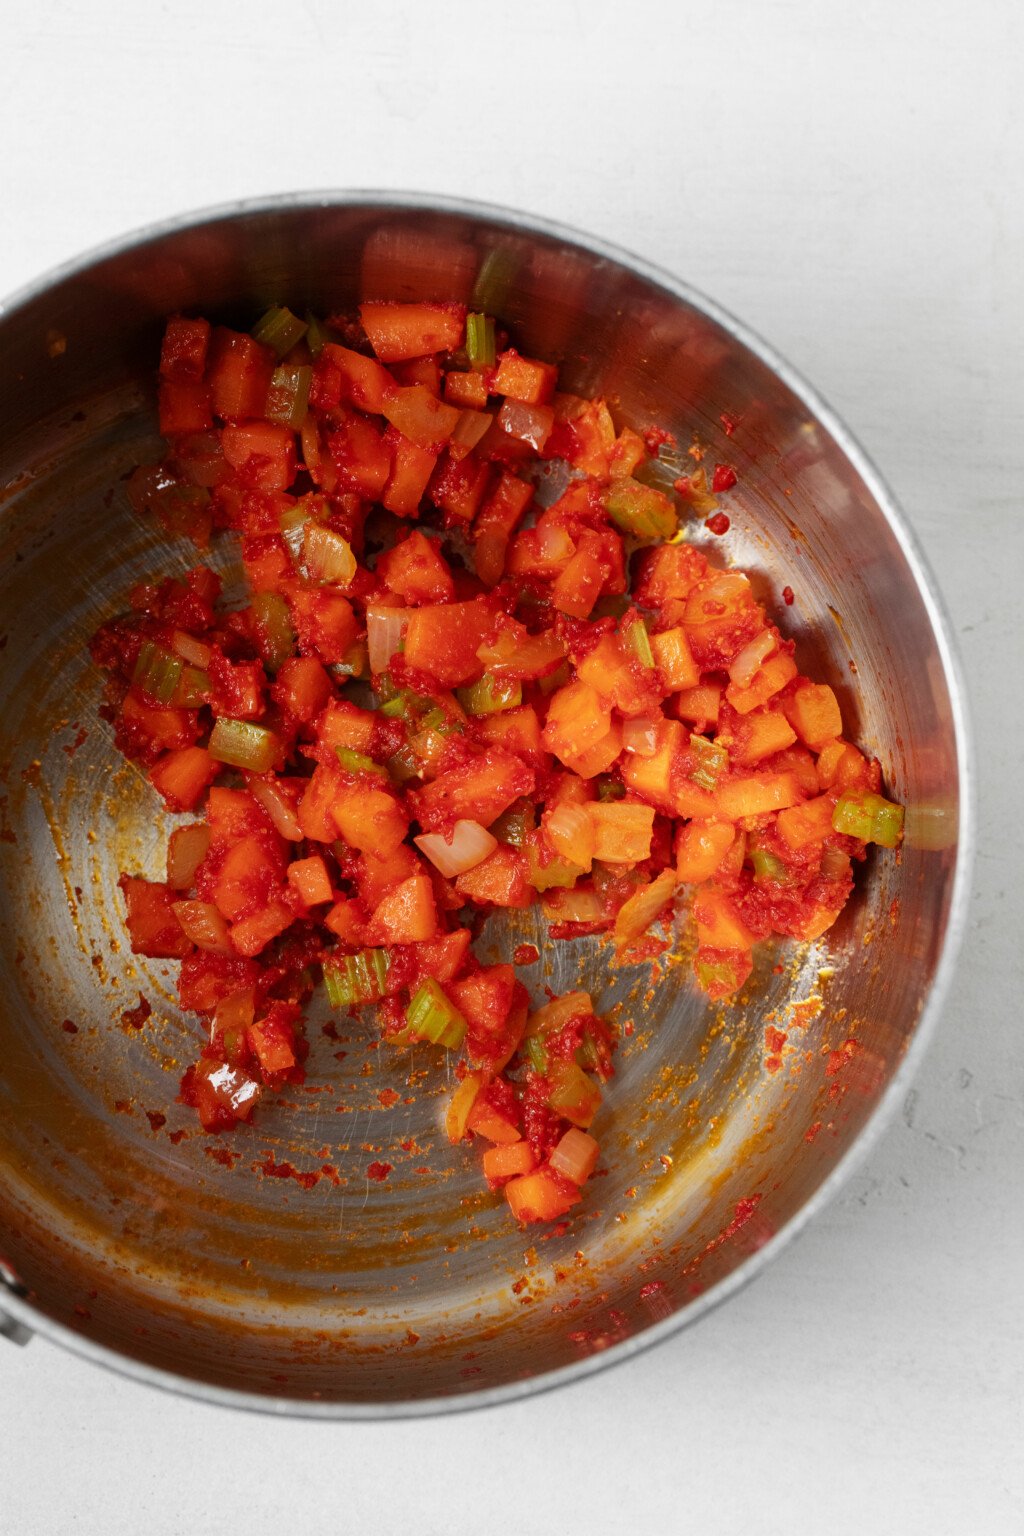 Vegetables and tomato paste are being sautéed in a metal sauce pan.